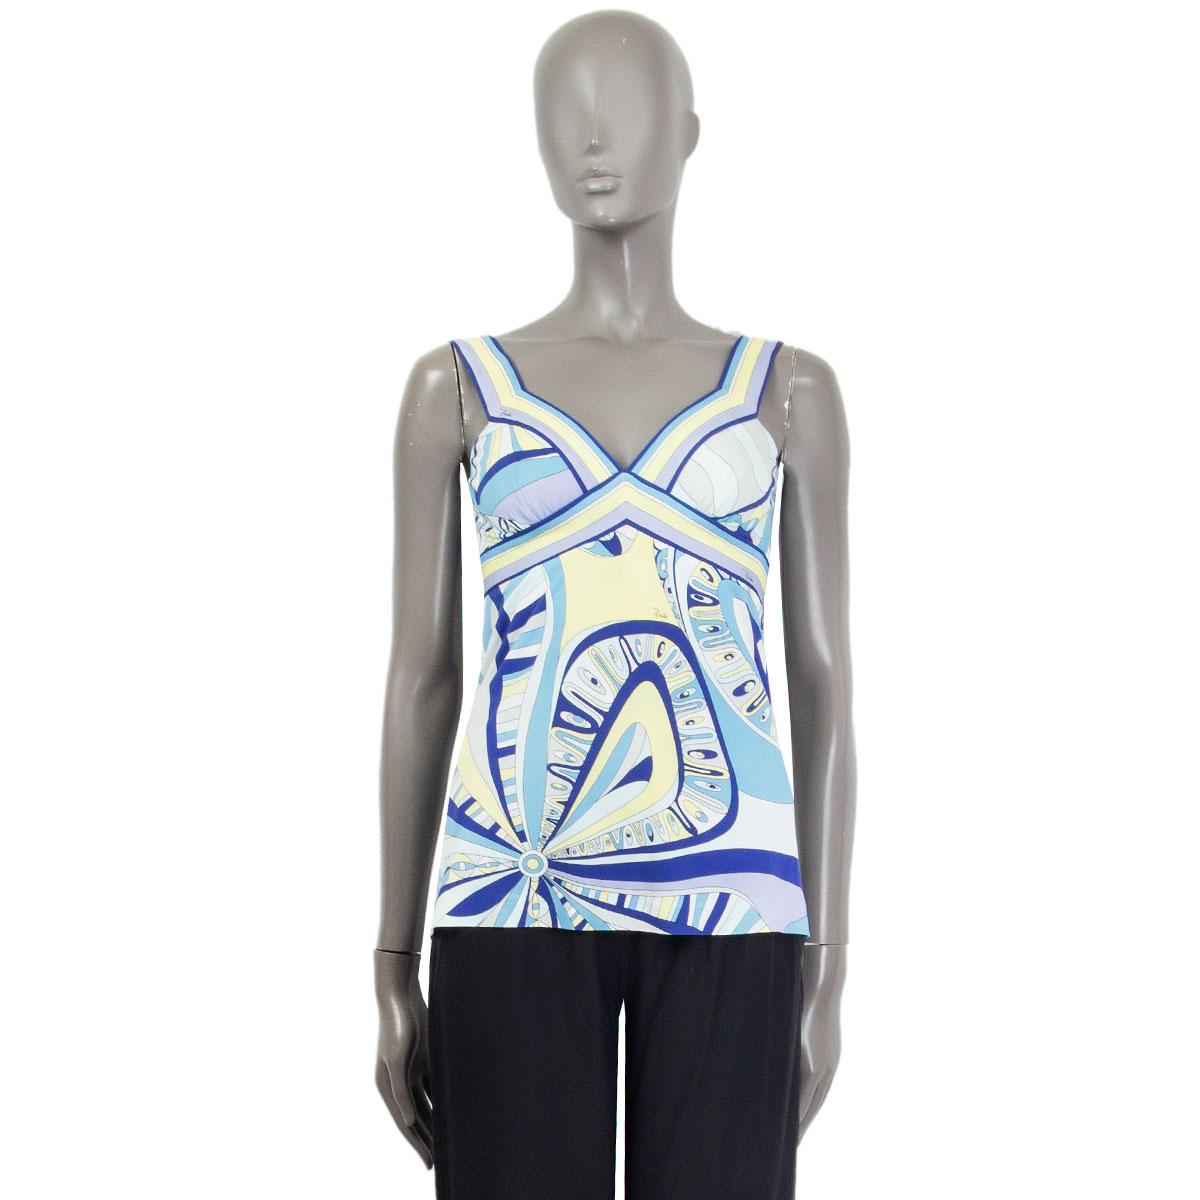 100% authentic Emilio Pucci tank-top in lilac, light blue, blue, light grey, white and lemon viscose (83%) and silk (17%). Opens with a zipper on the side. Has been worn with two small pulled threads on the back. Overall in very good condition.